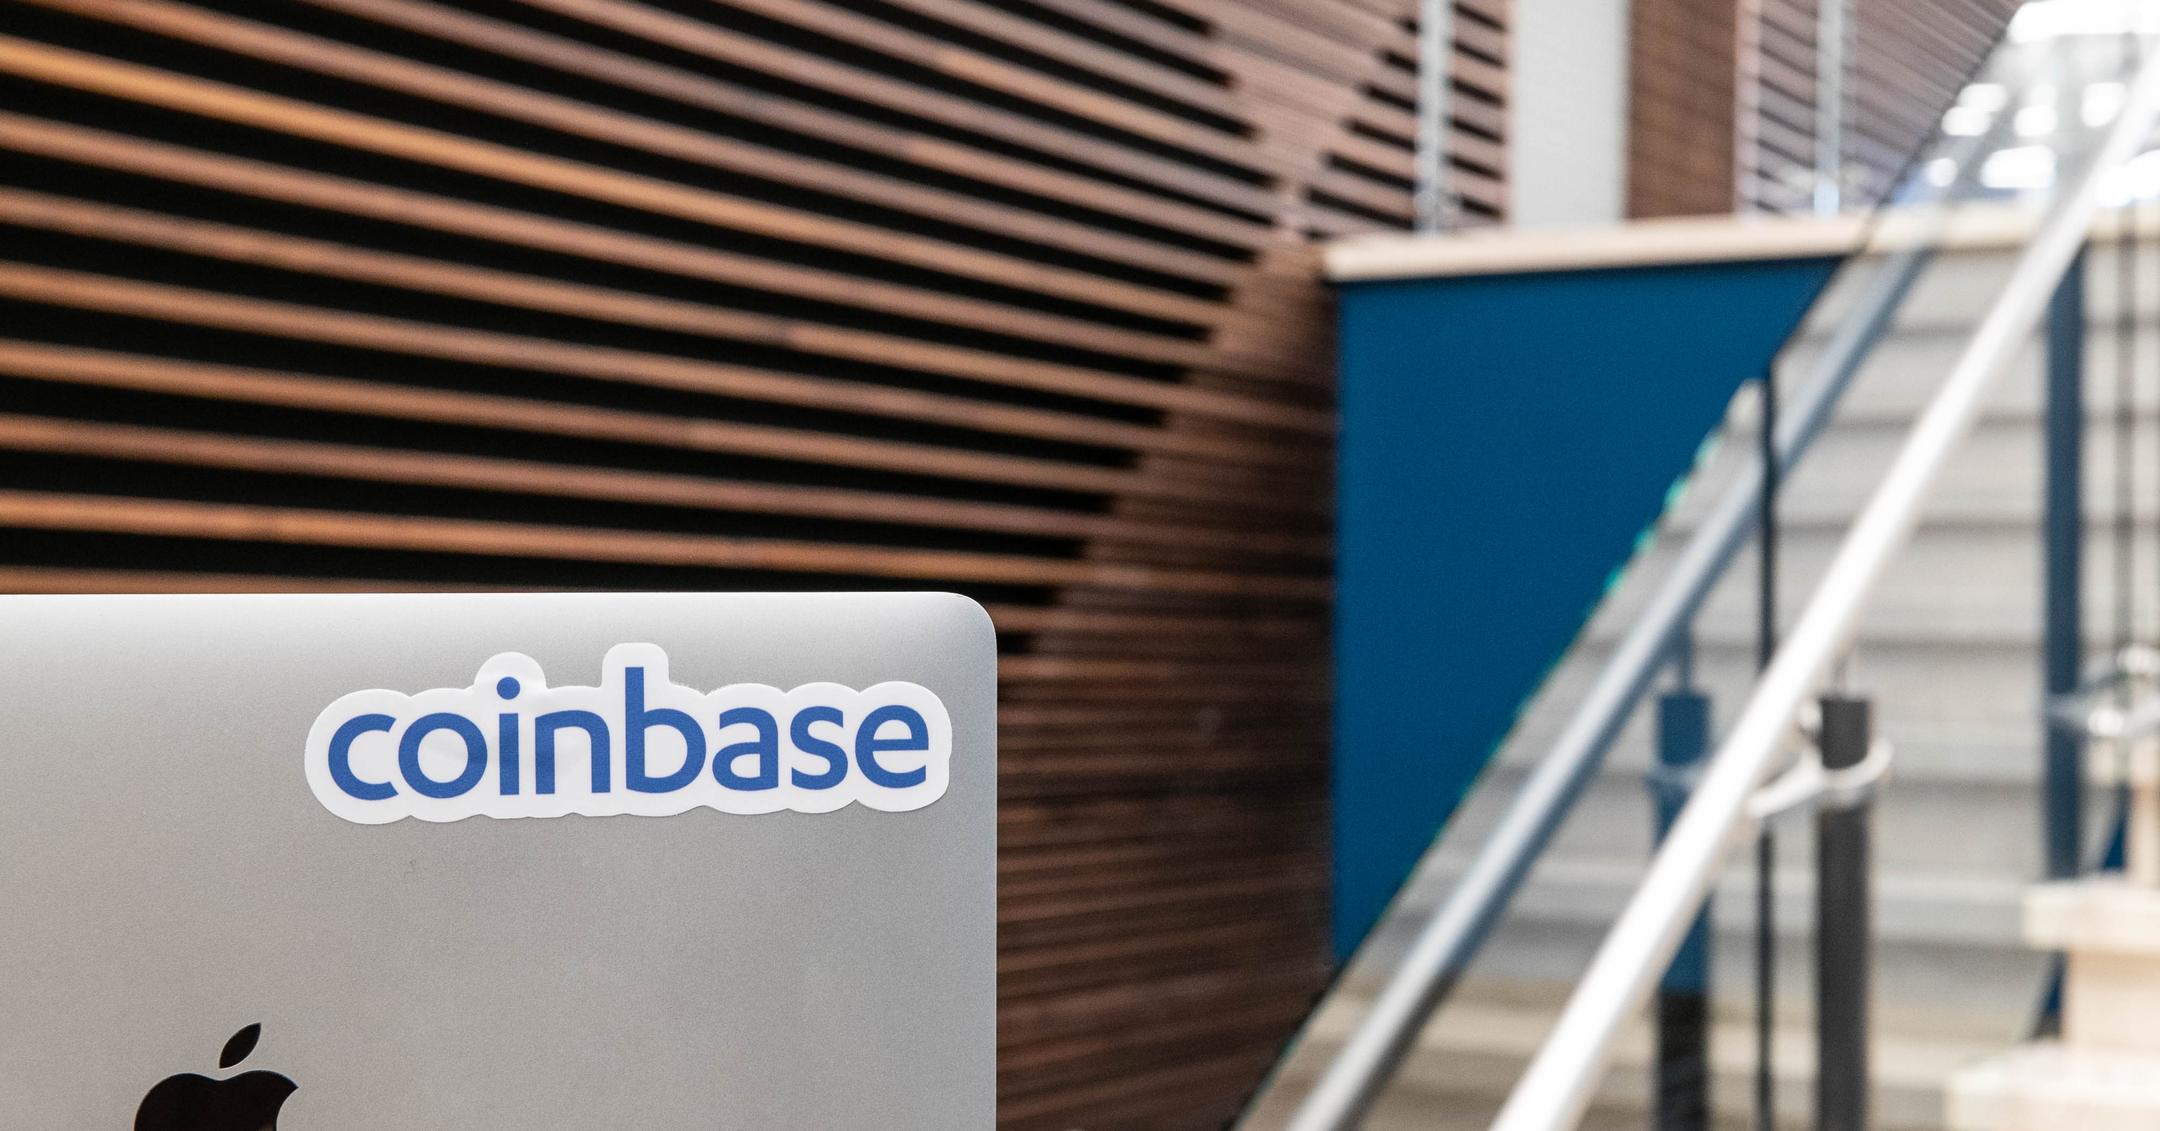 coinbase transaction fees out of control